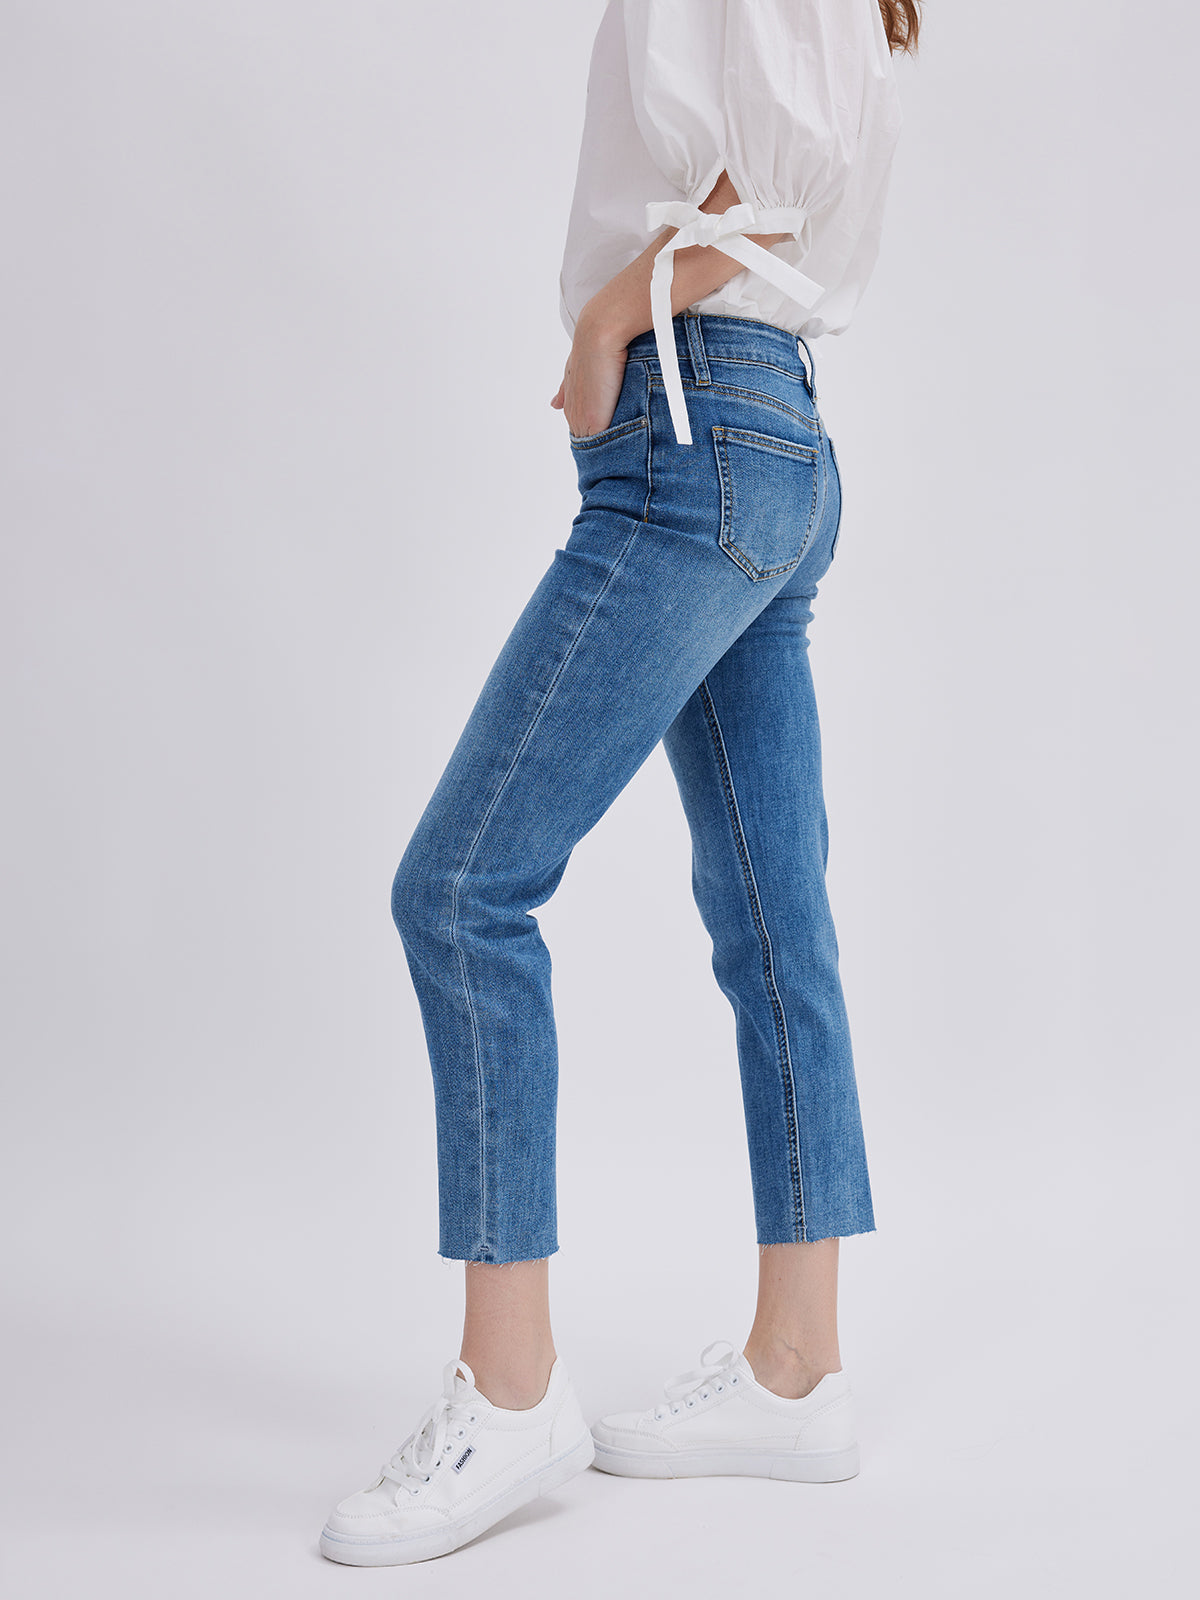 Blue Jeans for Women with Elastic